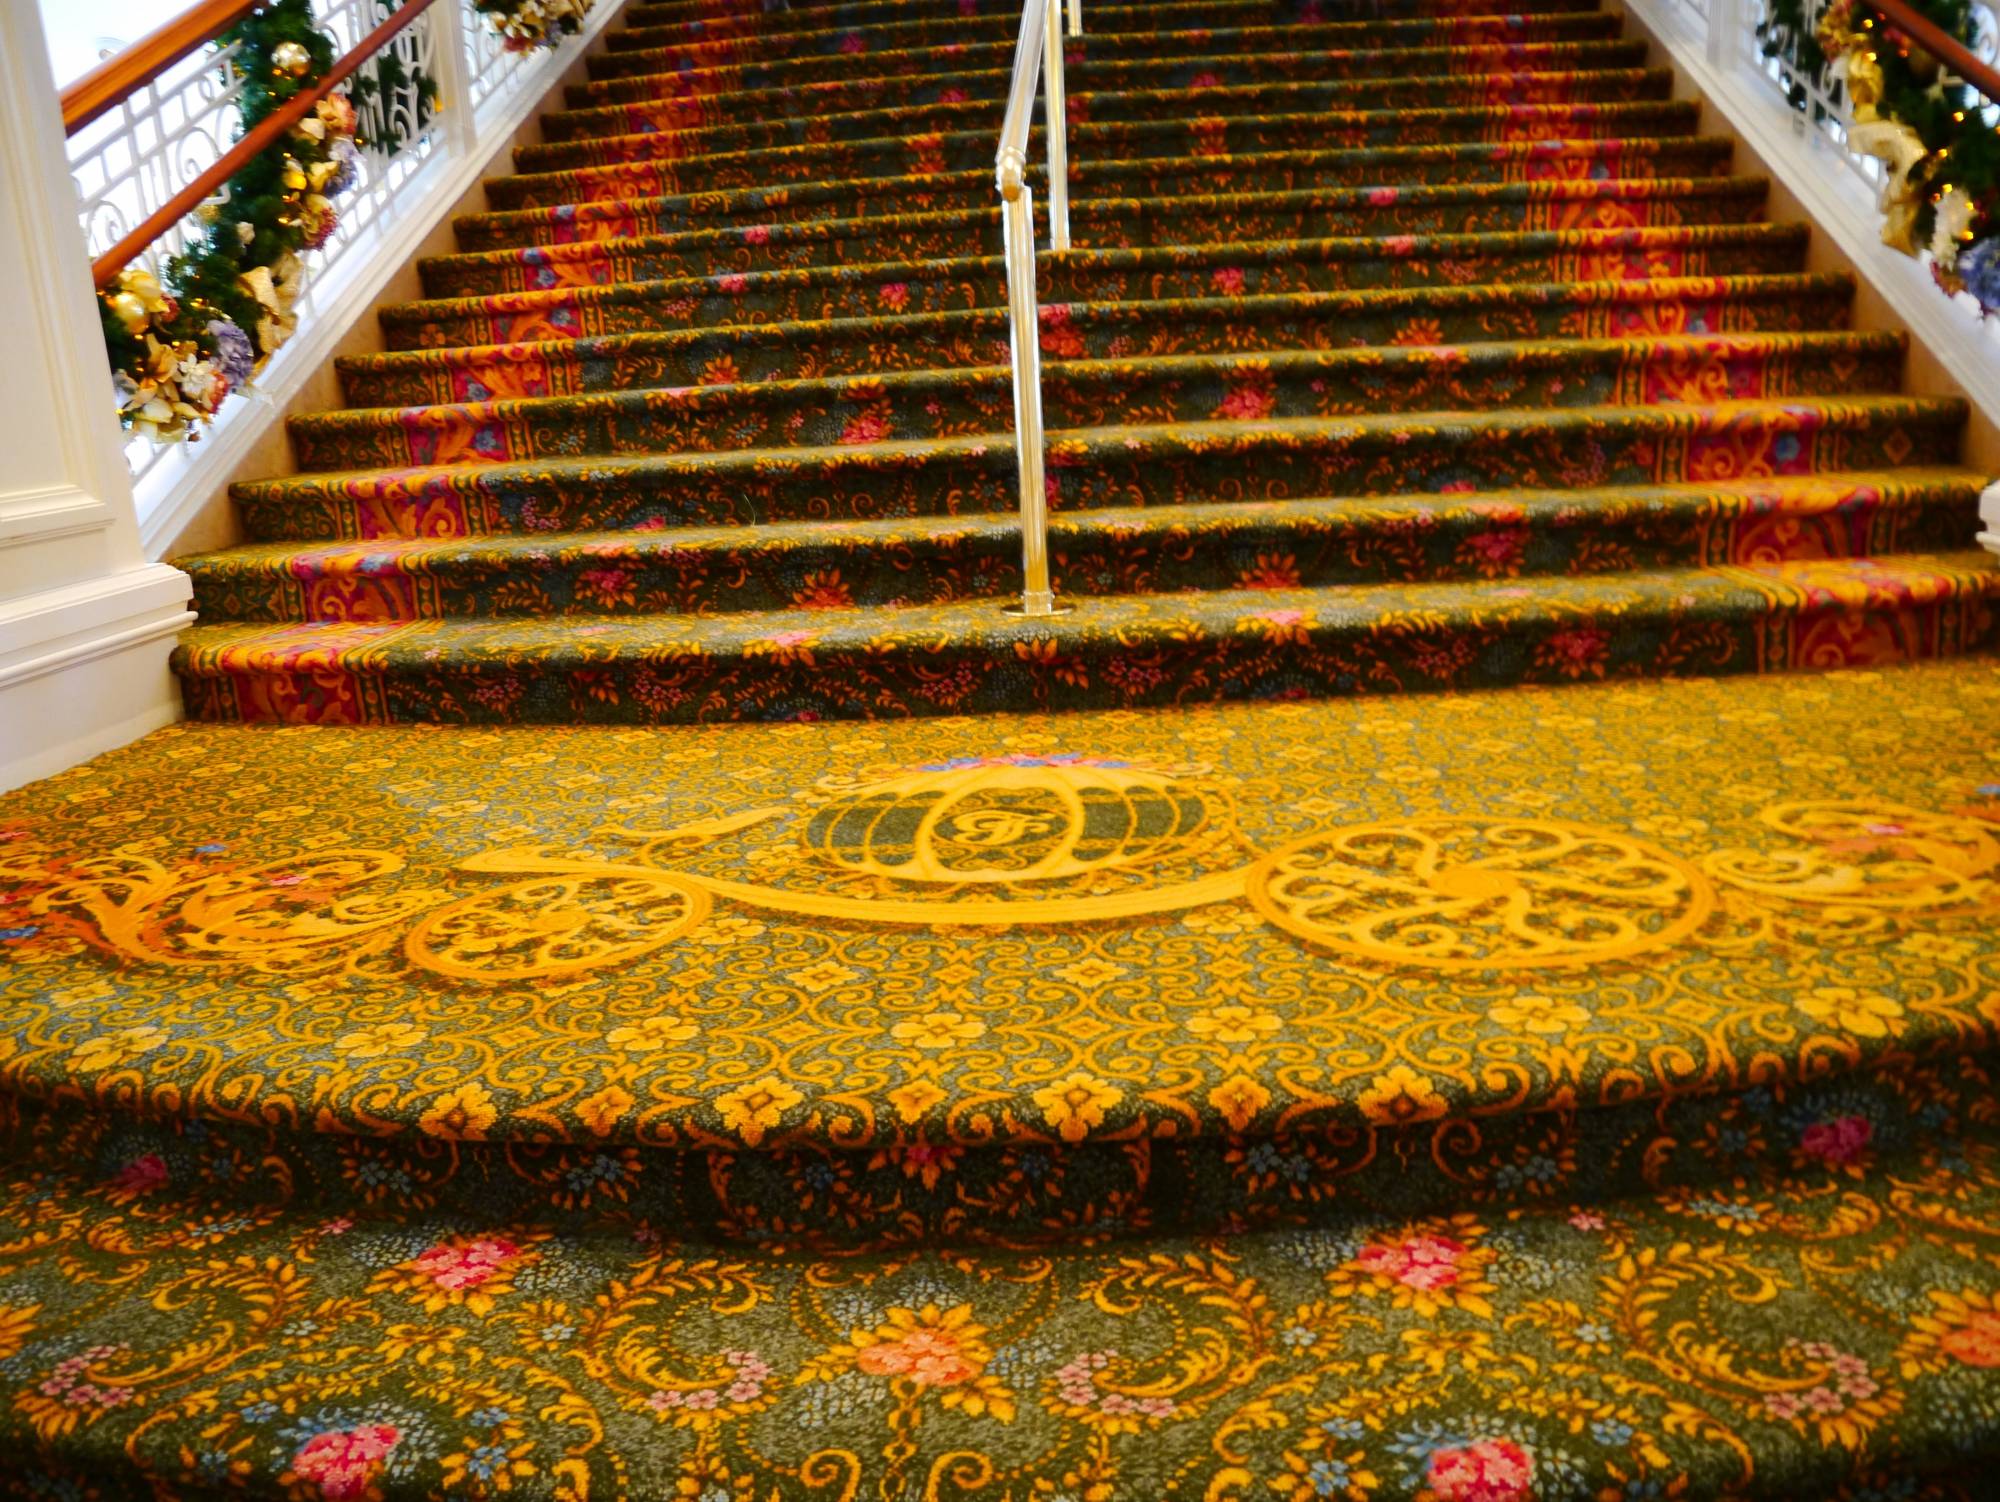 Grand Floridian - main staircase